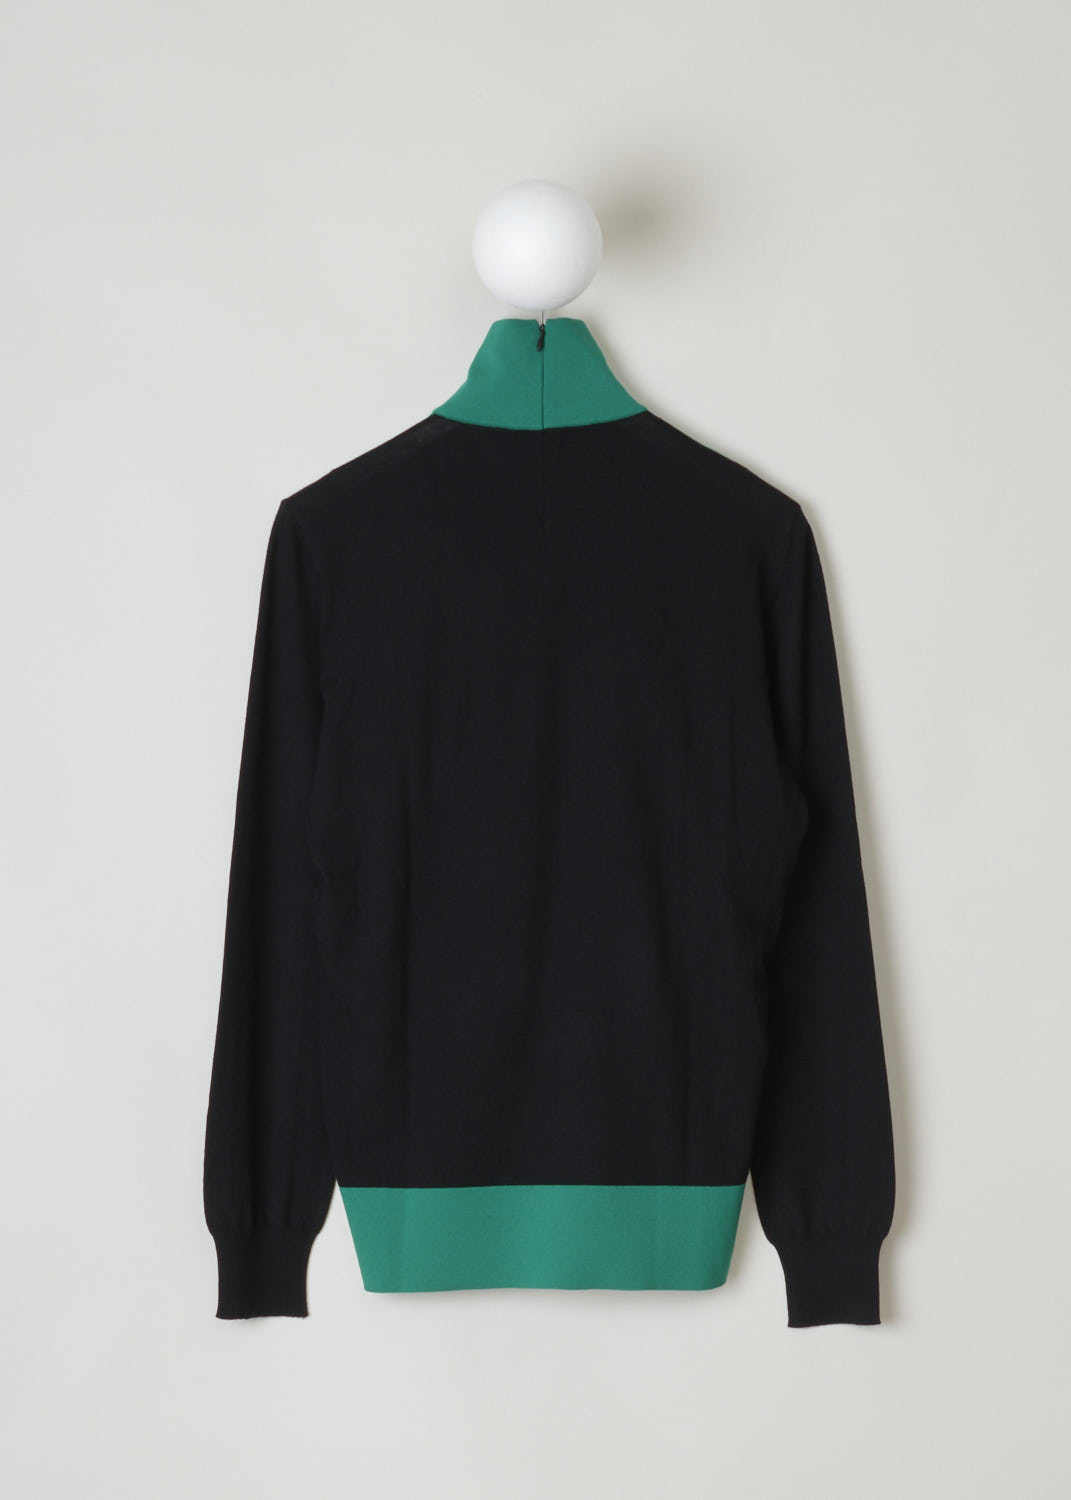 PLAN C, TWO-TONE TURTLENECK SWEATER, DVCMC51KG0_FW003_Z3052, Black, Green, Back, Beautiful two-toned turtleneck. The long sleeves and back are a deep black and the front and neck are green. In the back of the neck, a concealed zipper can be found.
